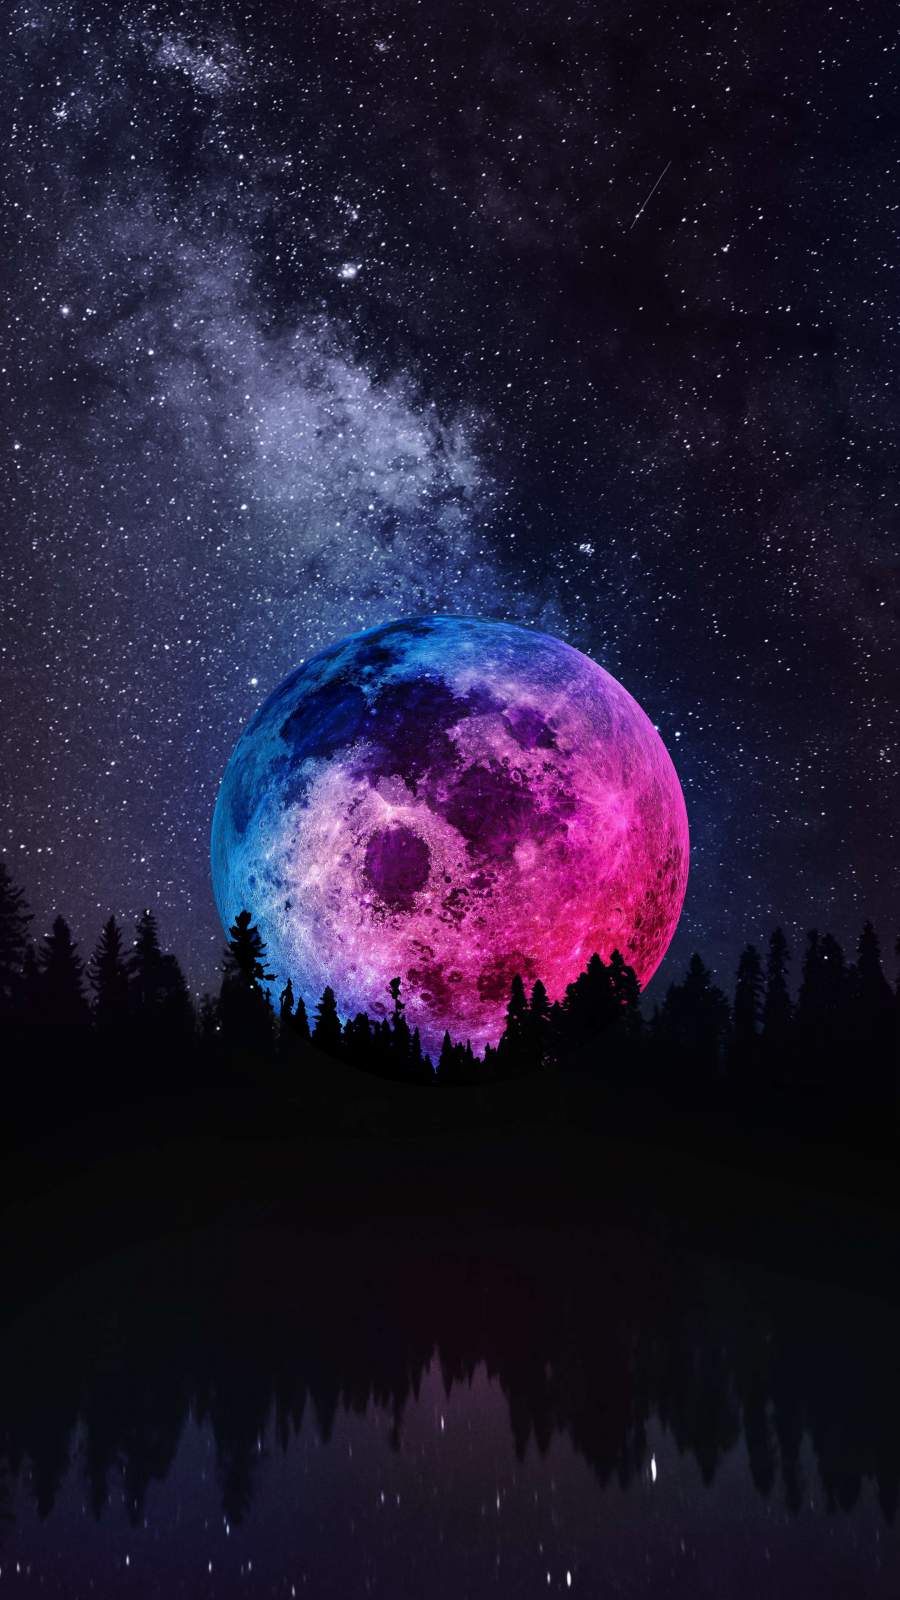 Moon In The Night IPhone Wallpaper - IPhone Wallpapers : iPhone Wallpapers